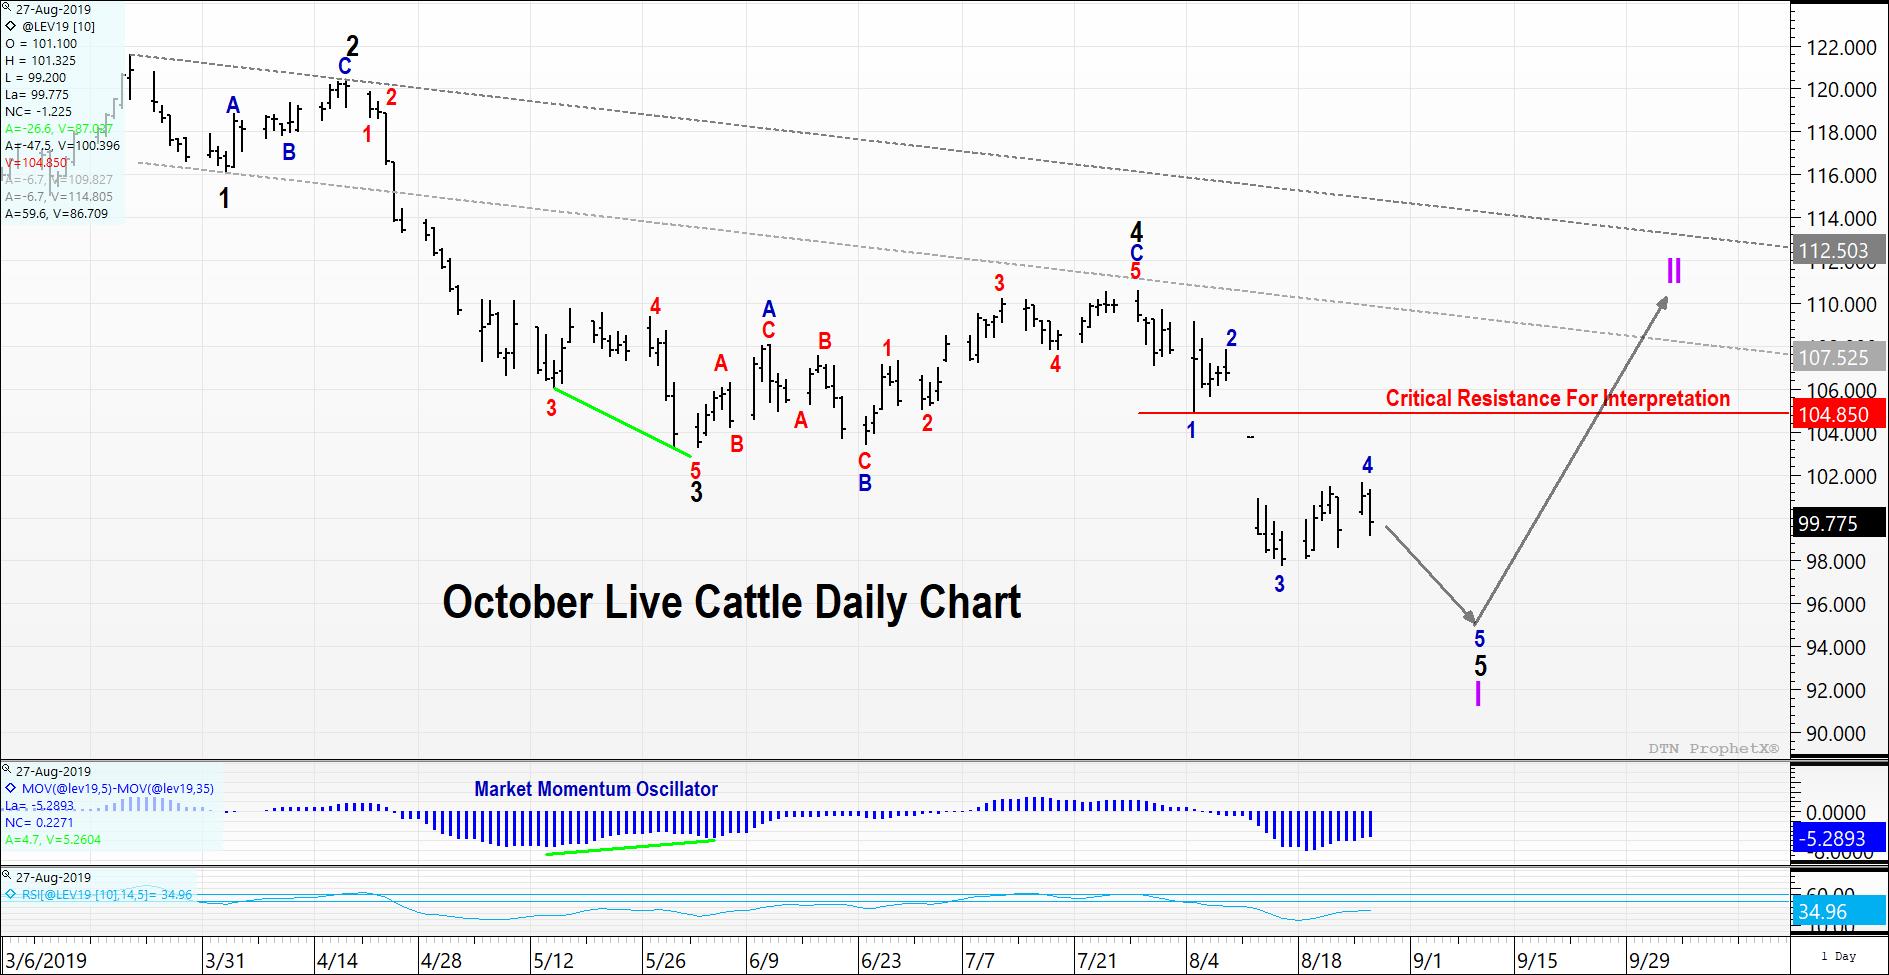 October Live Cattle Futures